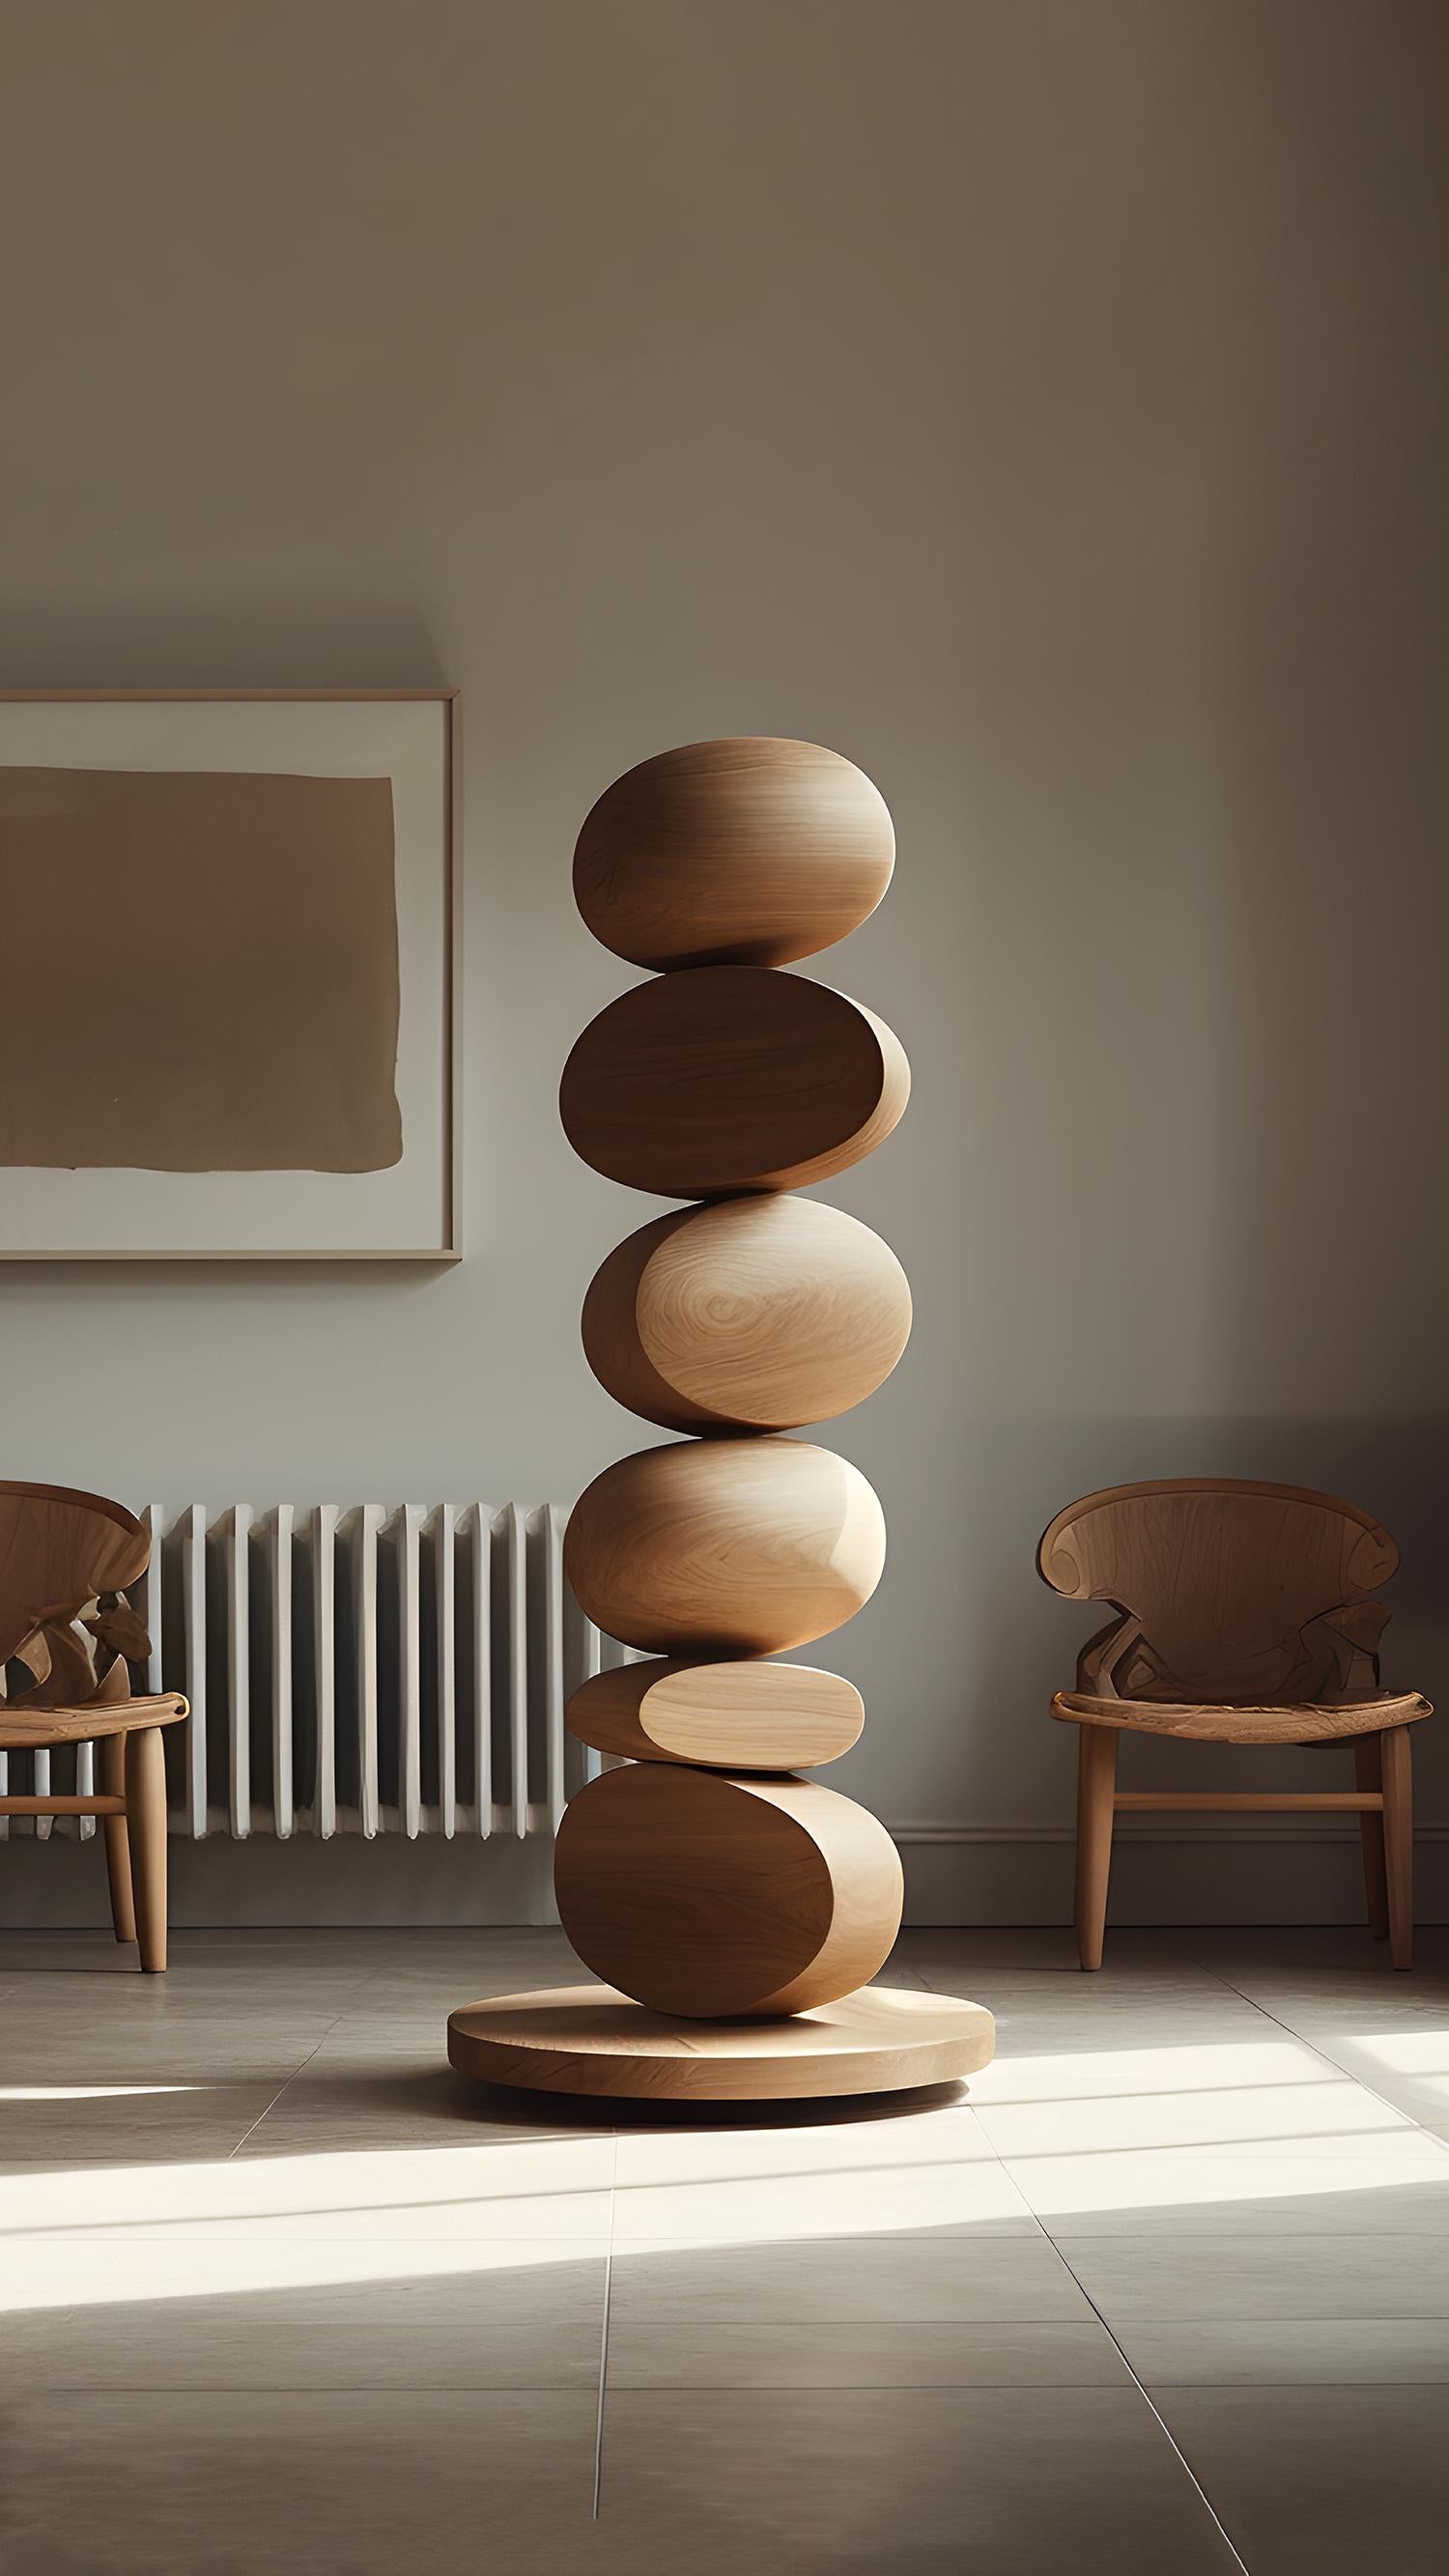 Hand-Crafted Escalona’s Elegance Still Stand No29: Tall Wooden Totem by NONO For Sale